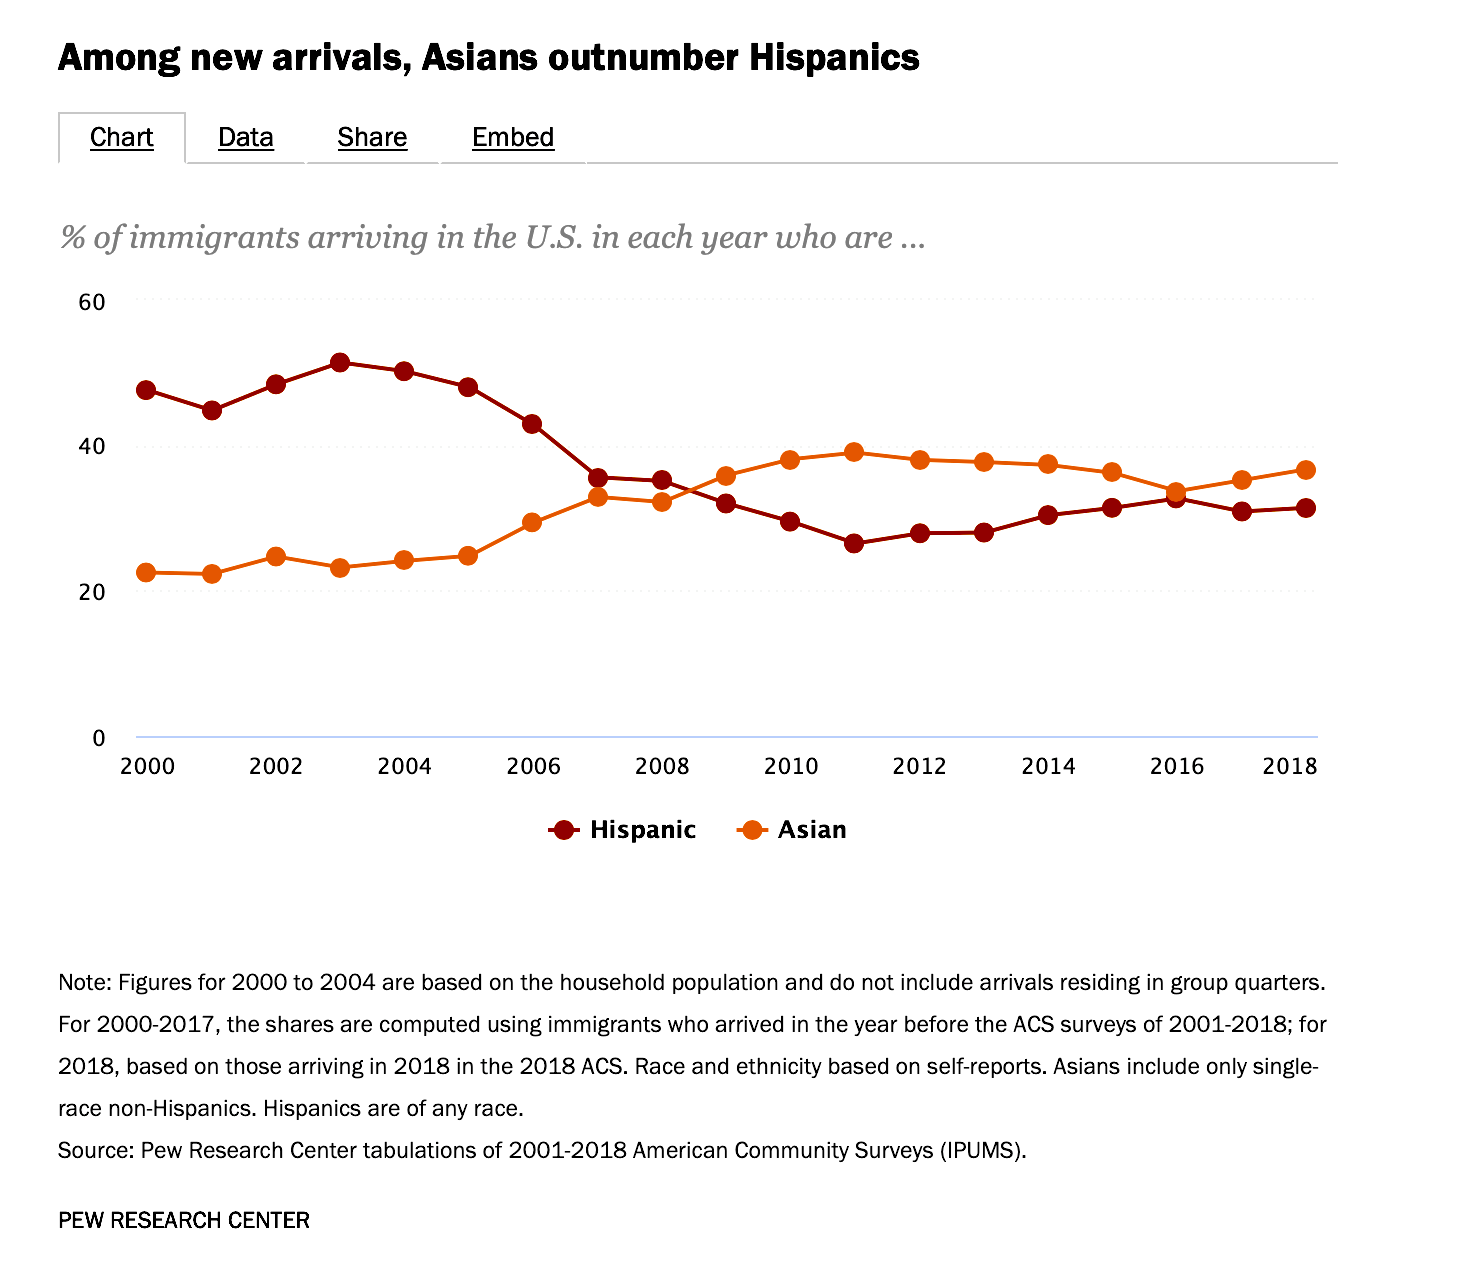 This chart shows that immigration from Asia outnumbered Latin x since 2010